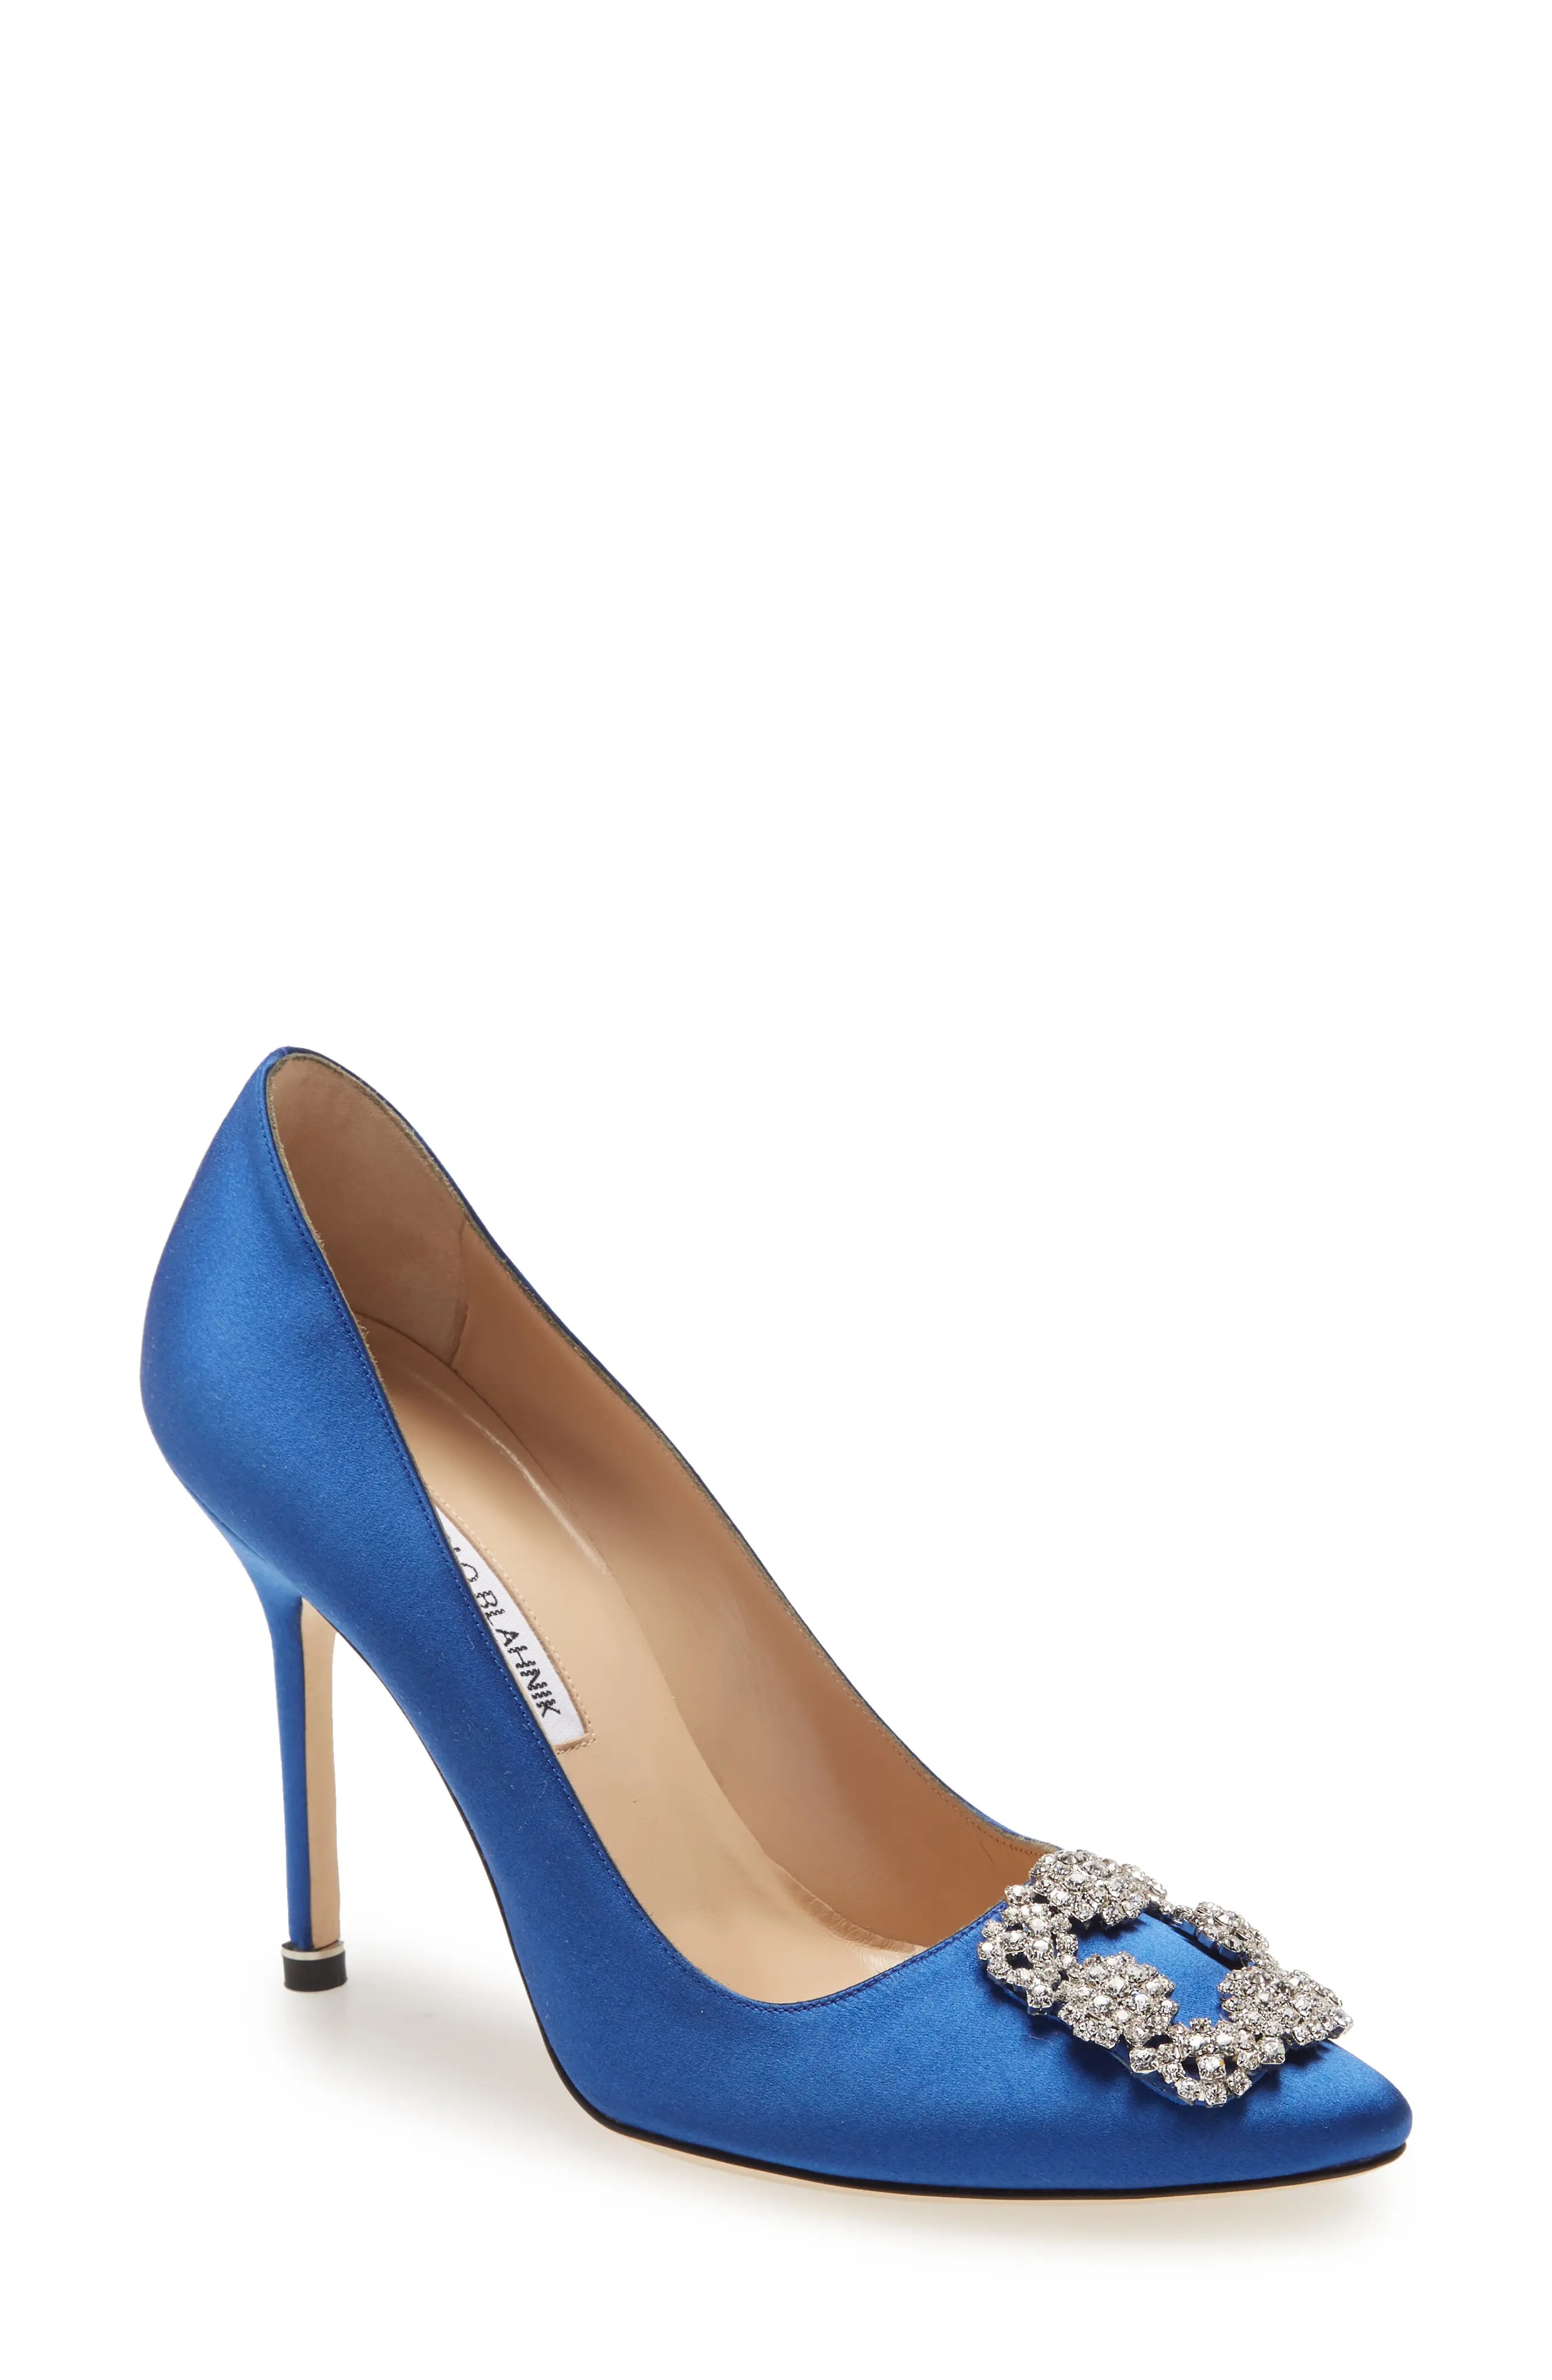 Hangisi Pointed Toe Pump in Blue Satin/Clear - 1